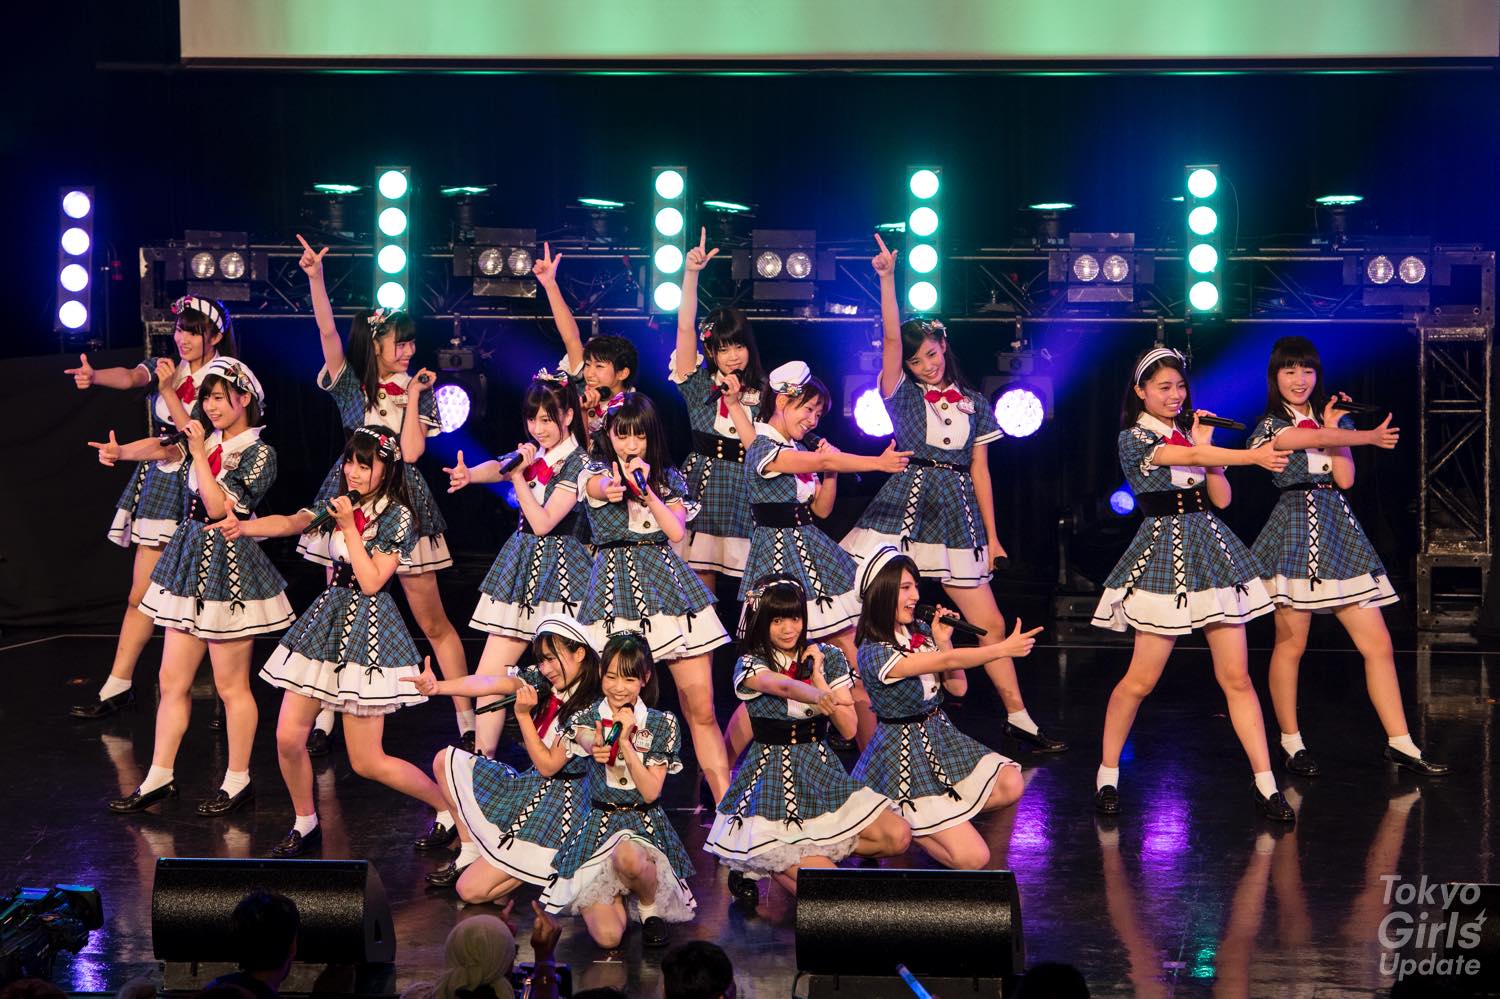 AKB48 Team 8 Aim For the Top During First Tokyo Idol Festival Appearance!